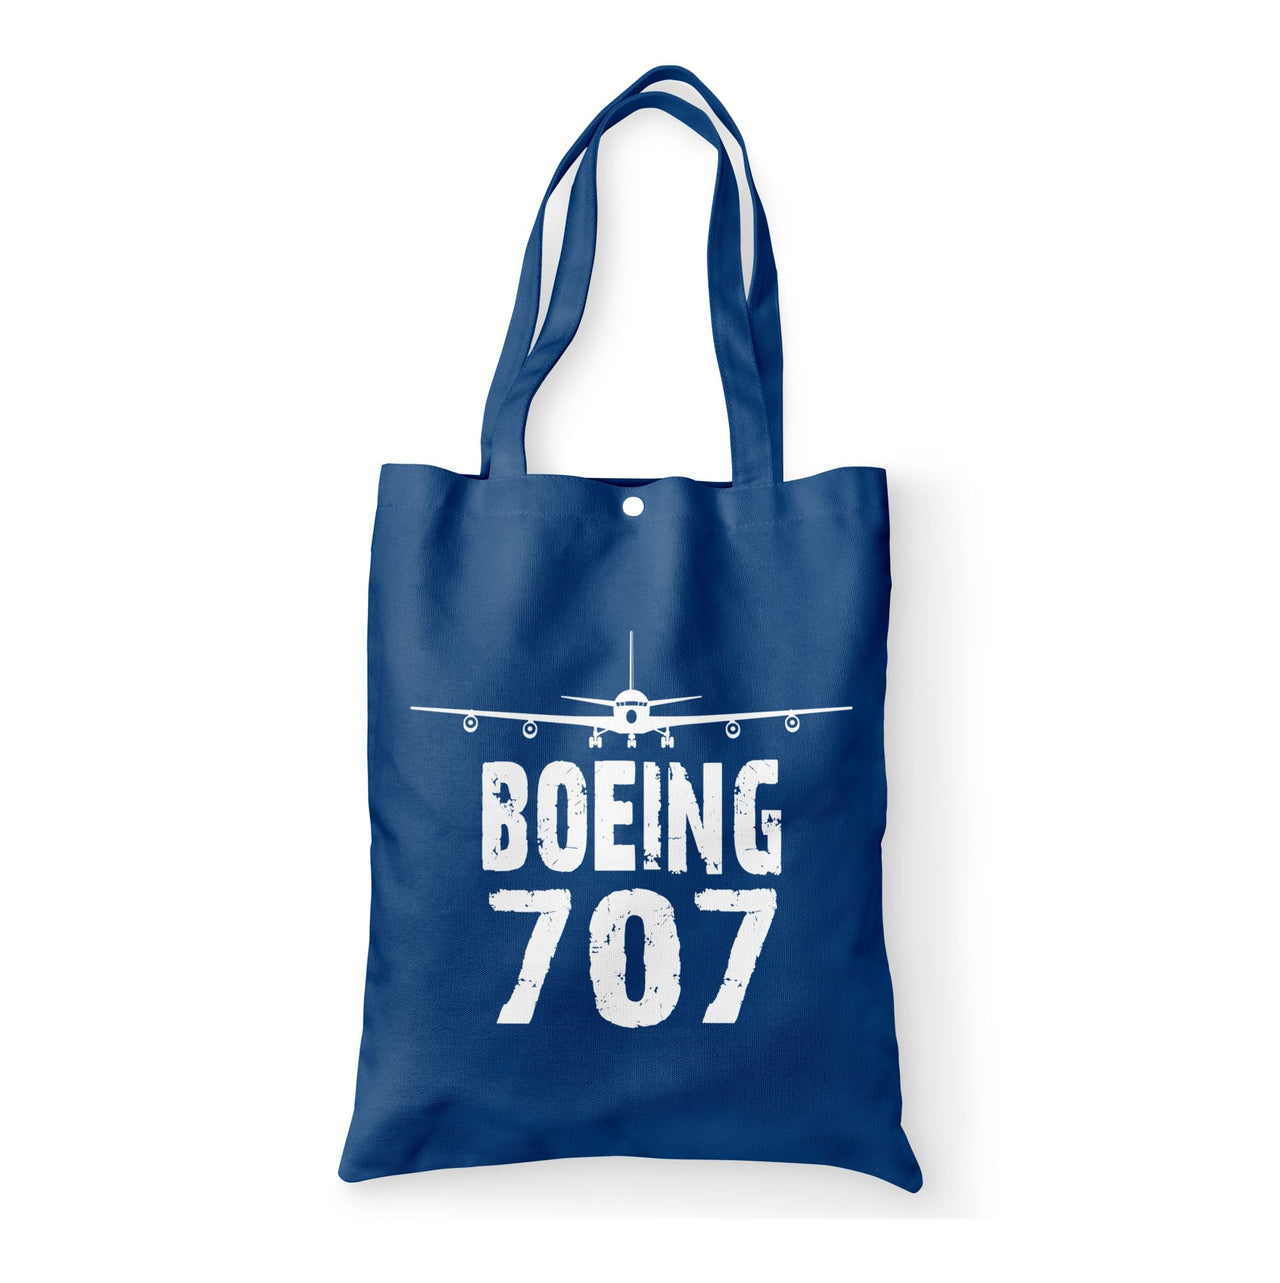 Boeing 707 & Plane Designed Tote Bags